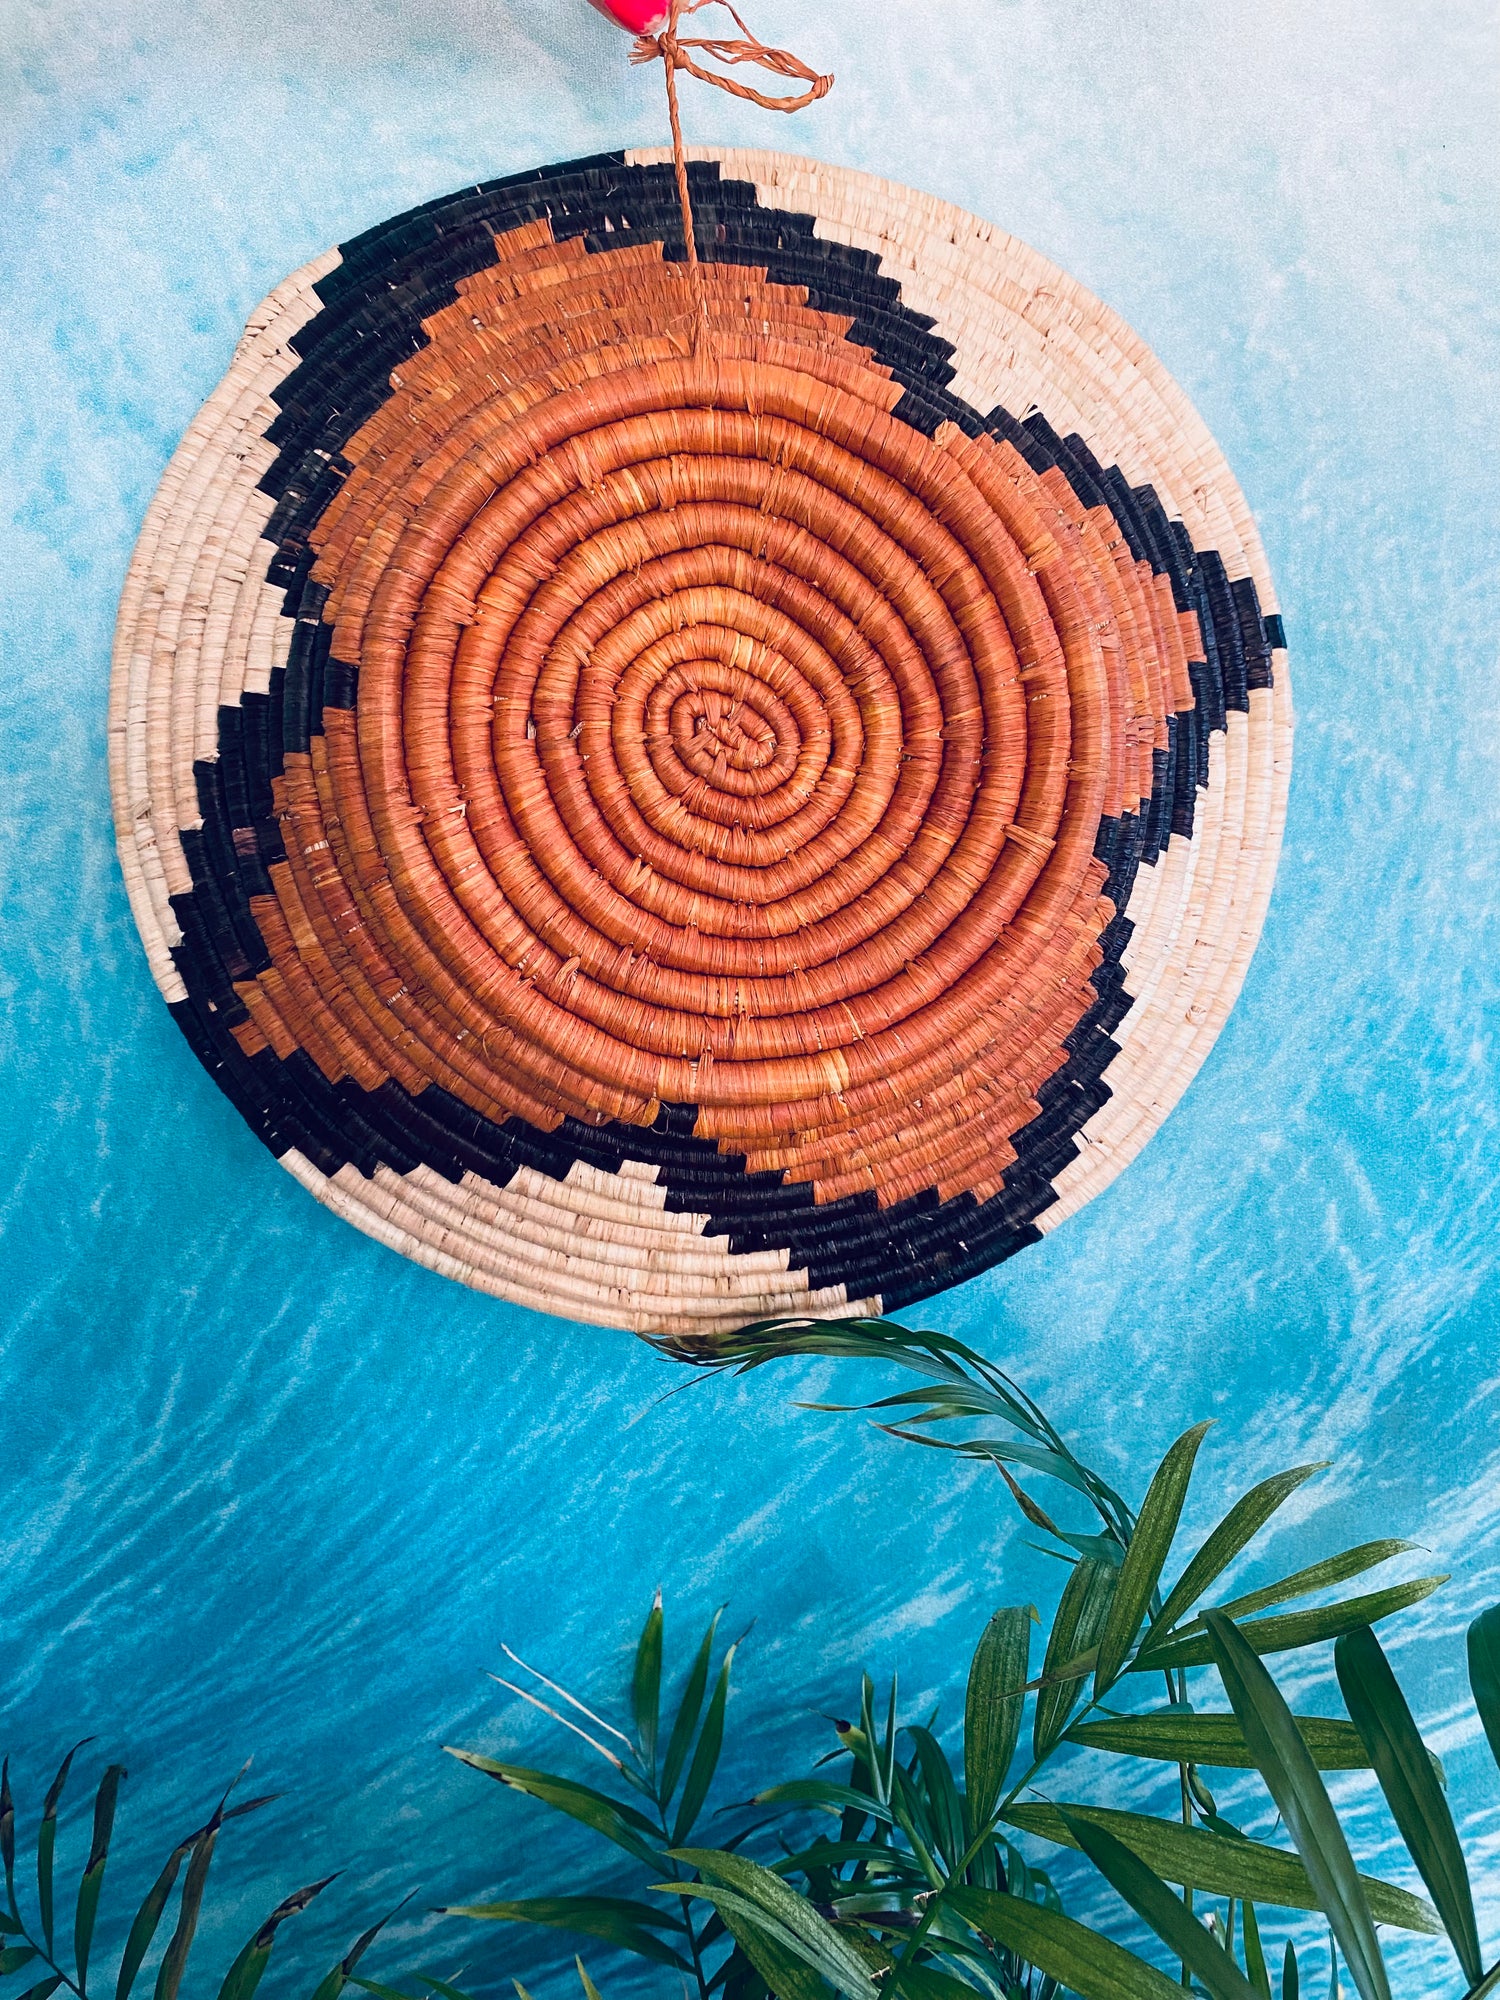 African Woven Trade Basket - Moon Room Shop and Wellness